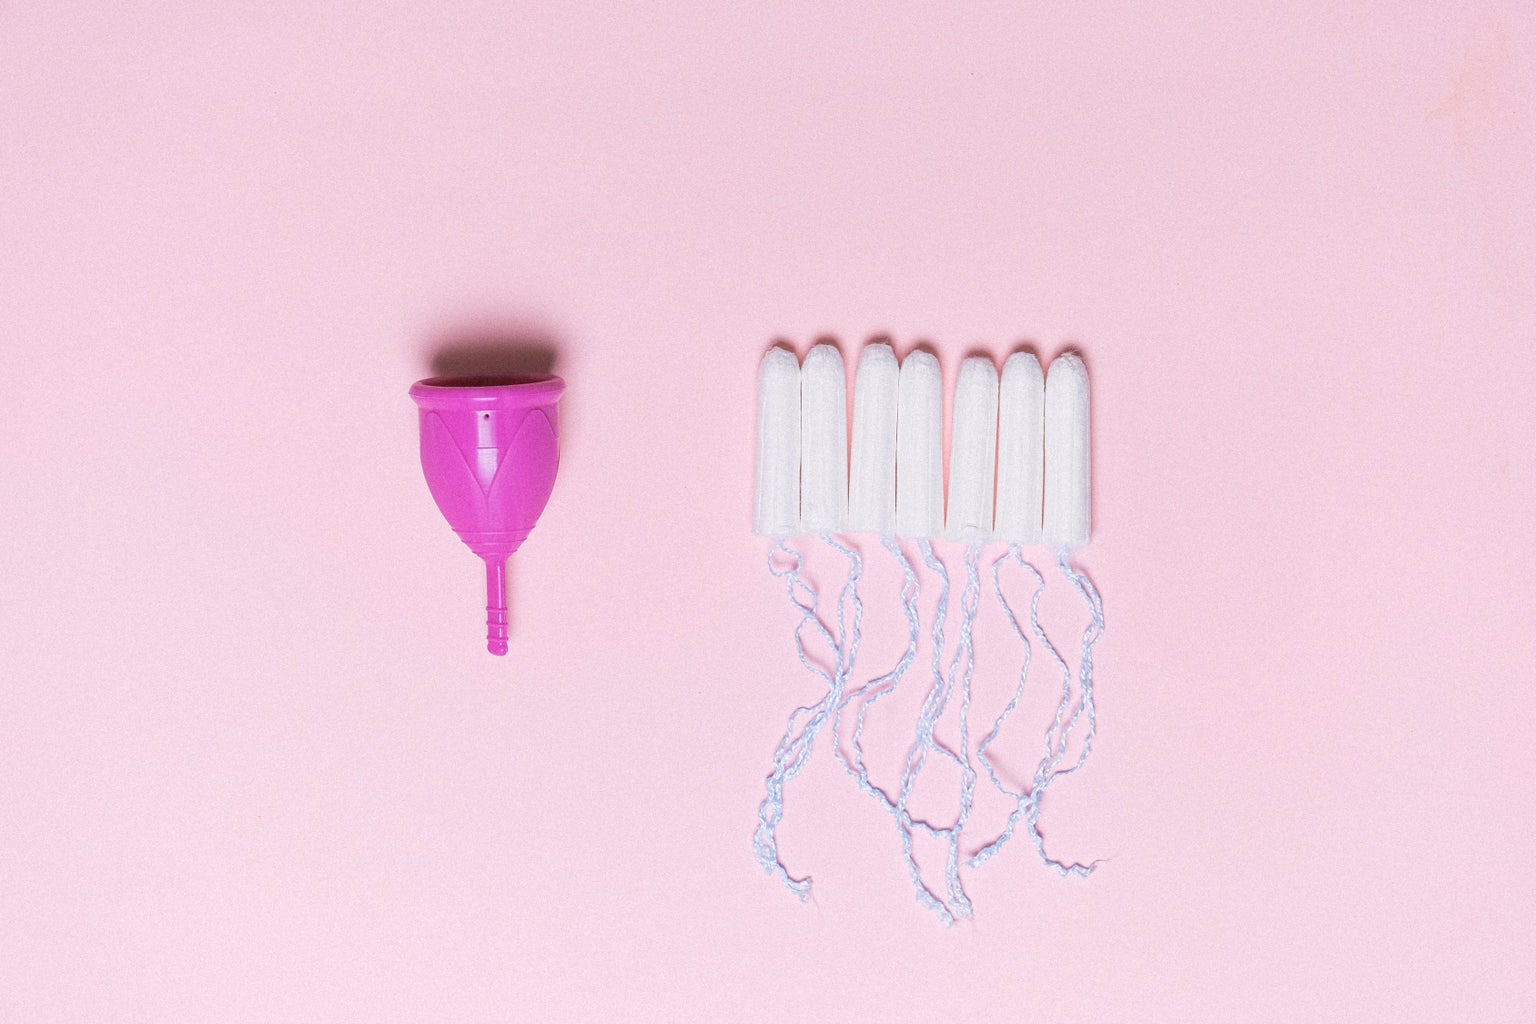 Menstrual Cup next to tampons on a pink background